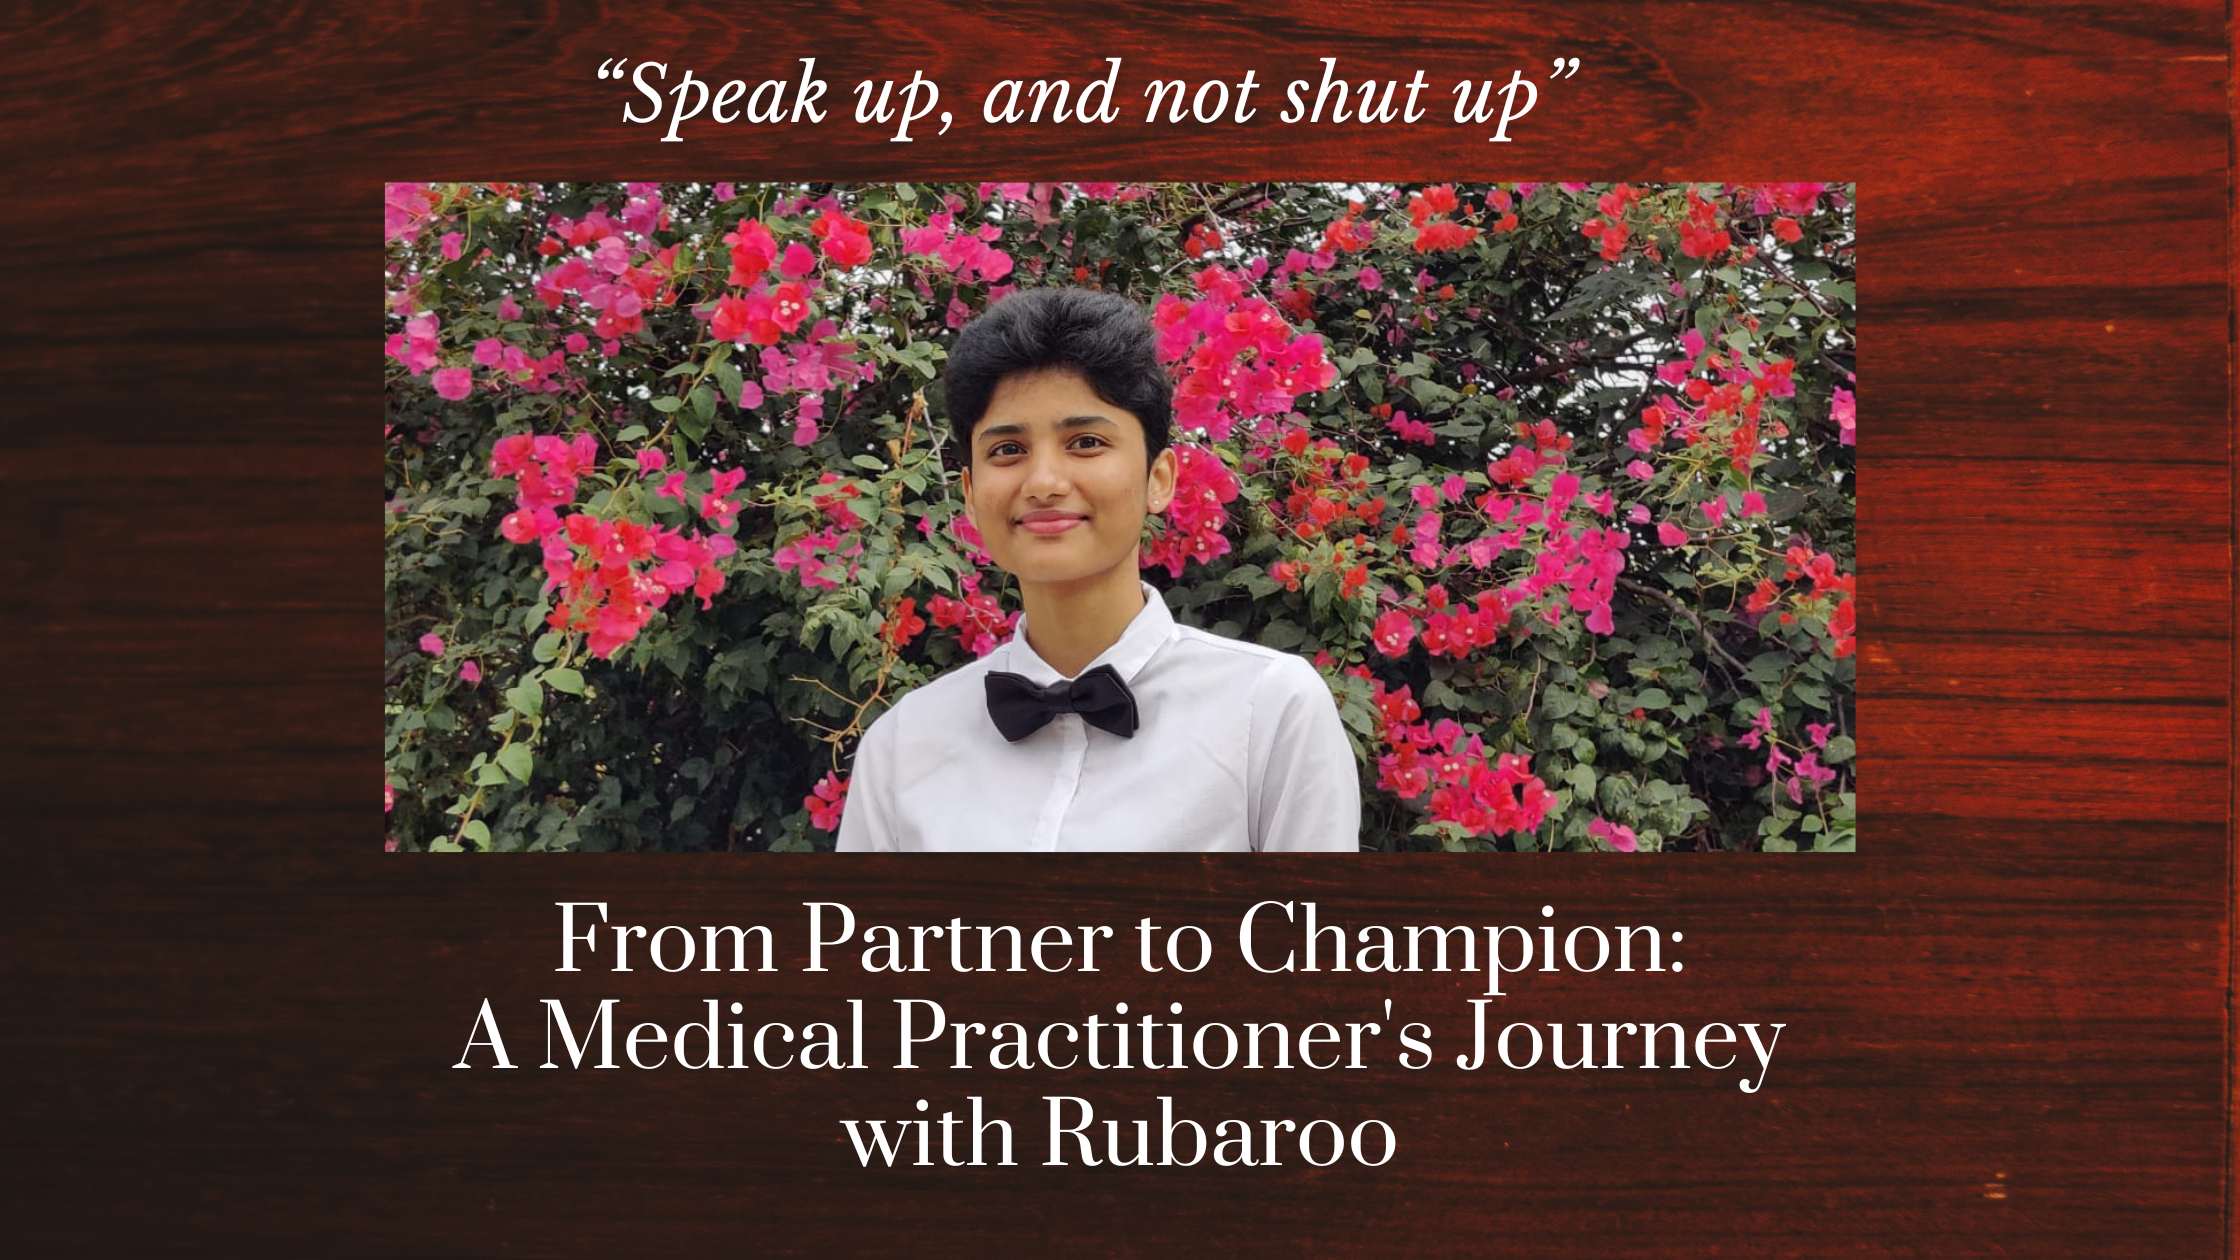 From Partner to Champion: A Medical Practitioner’s Journey with Rubaroo